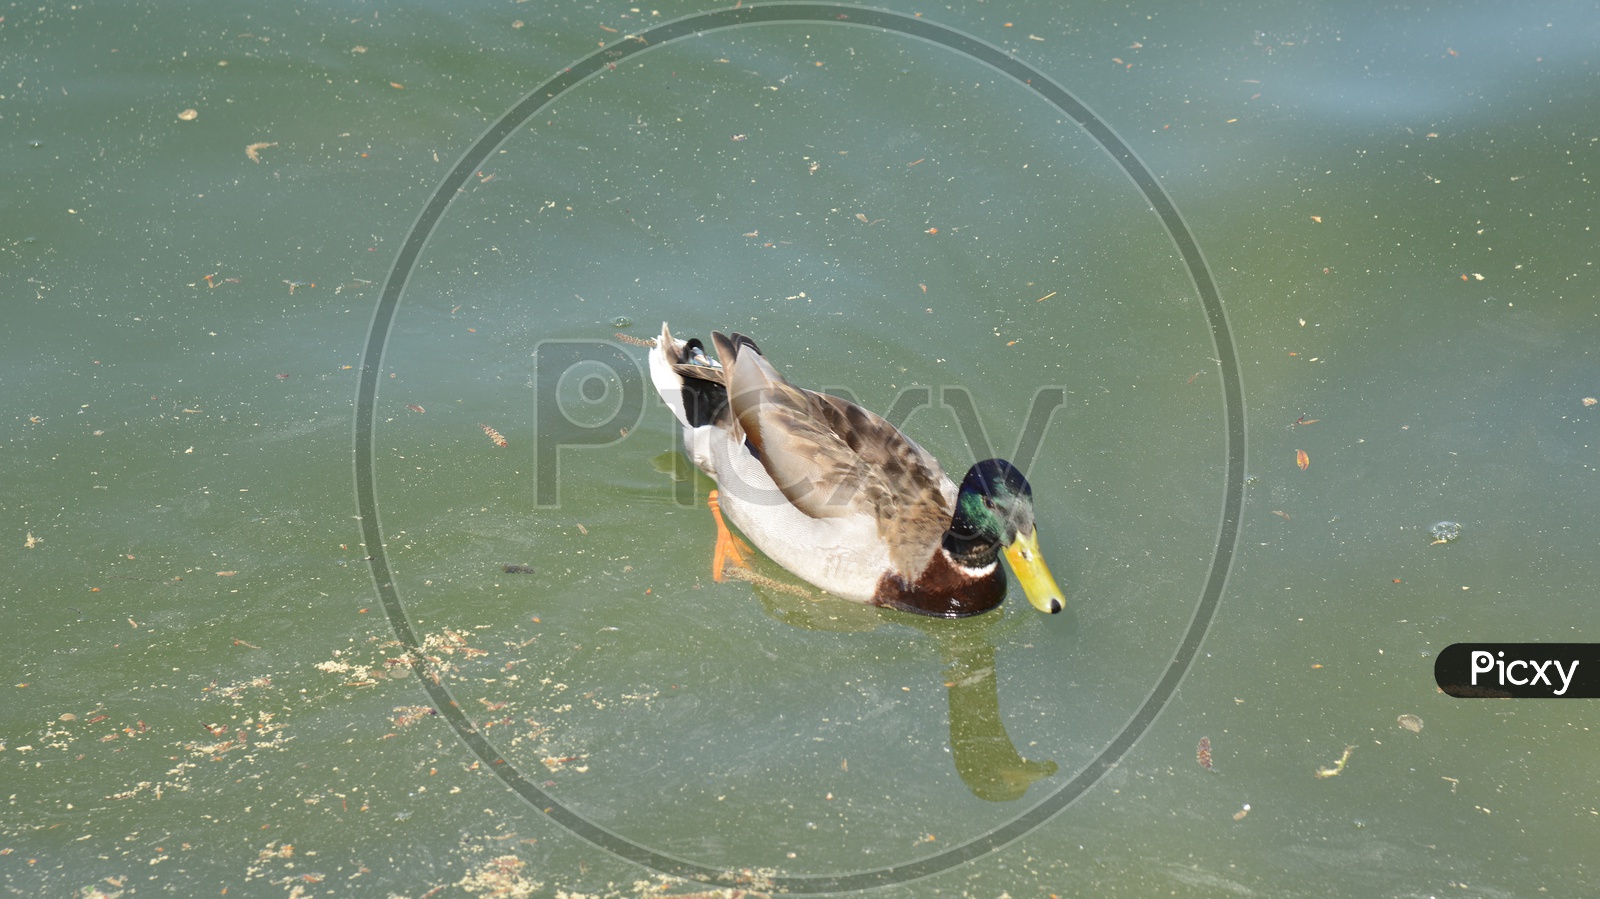 Ducks in a Pond Water